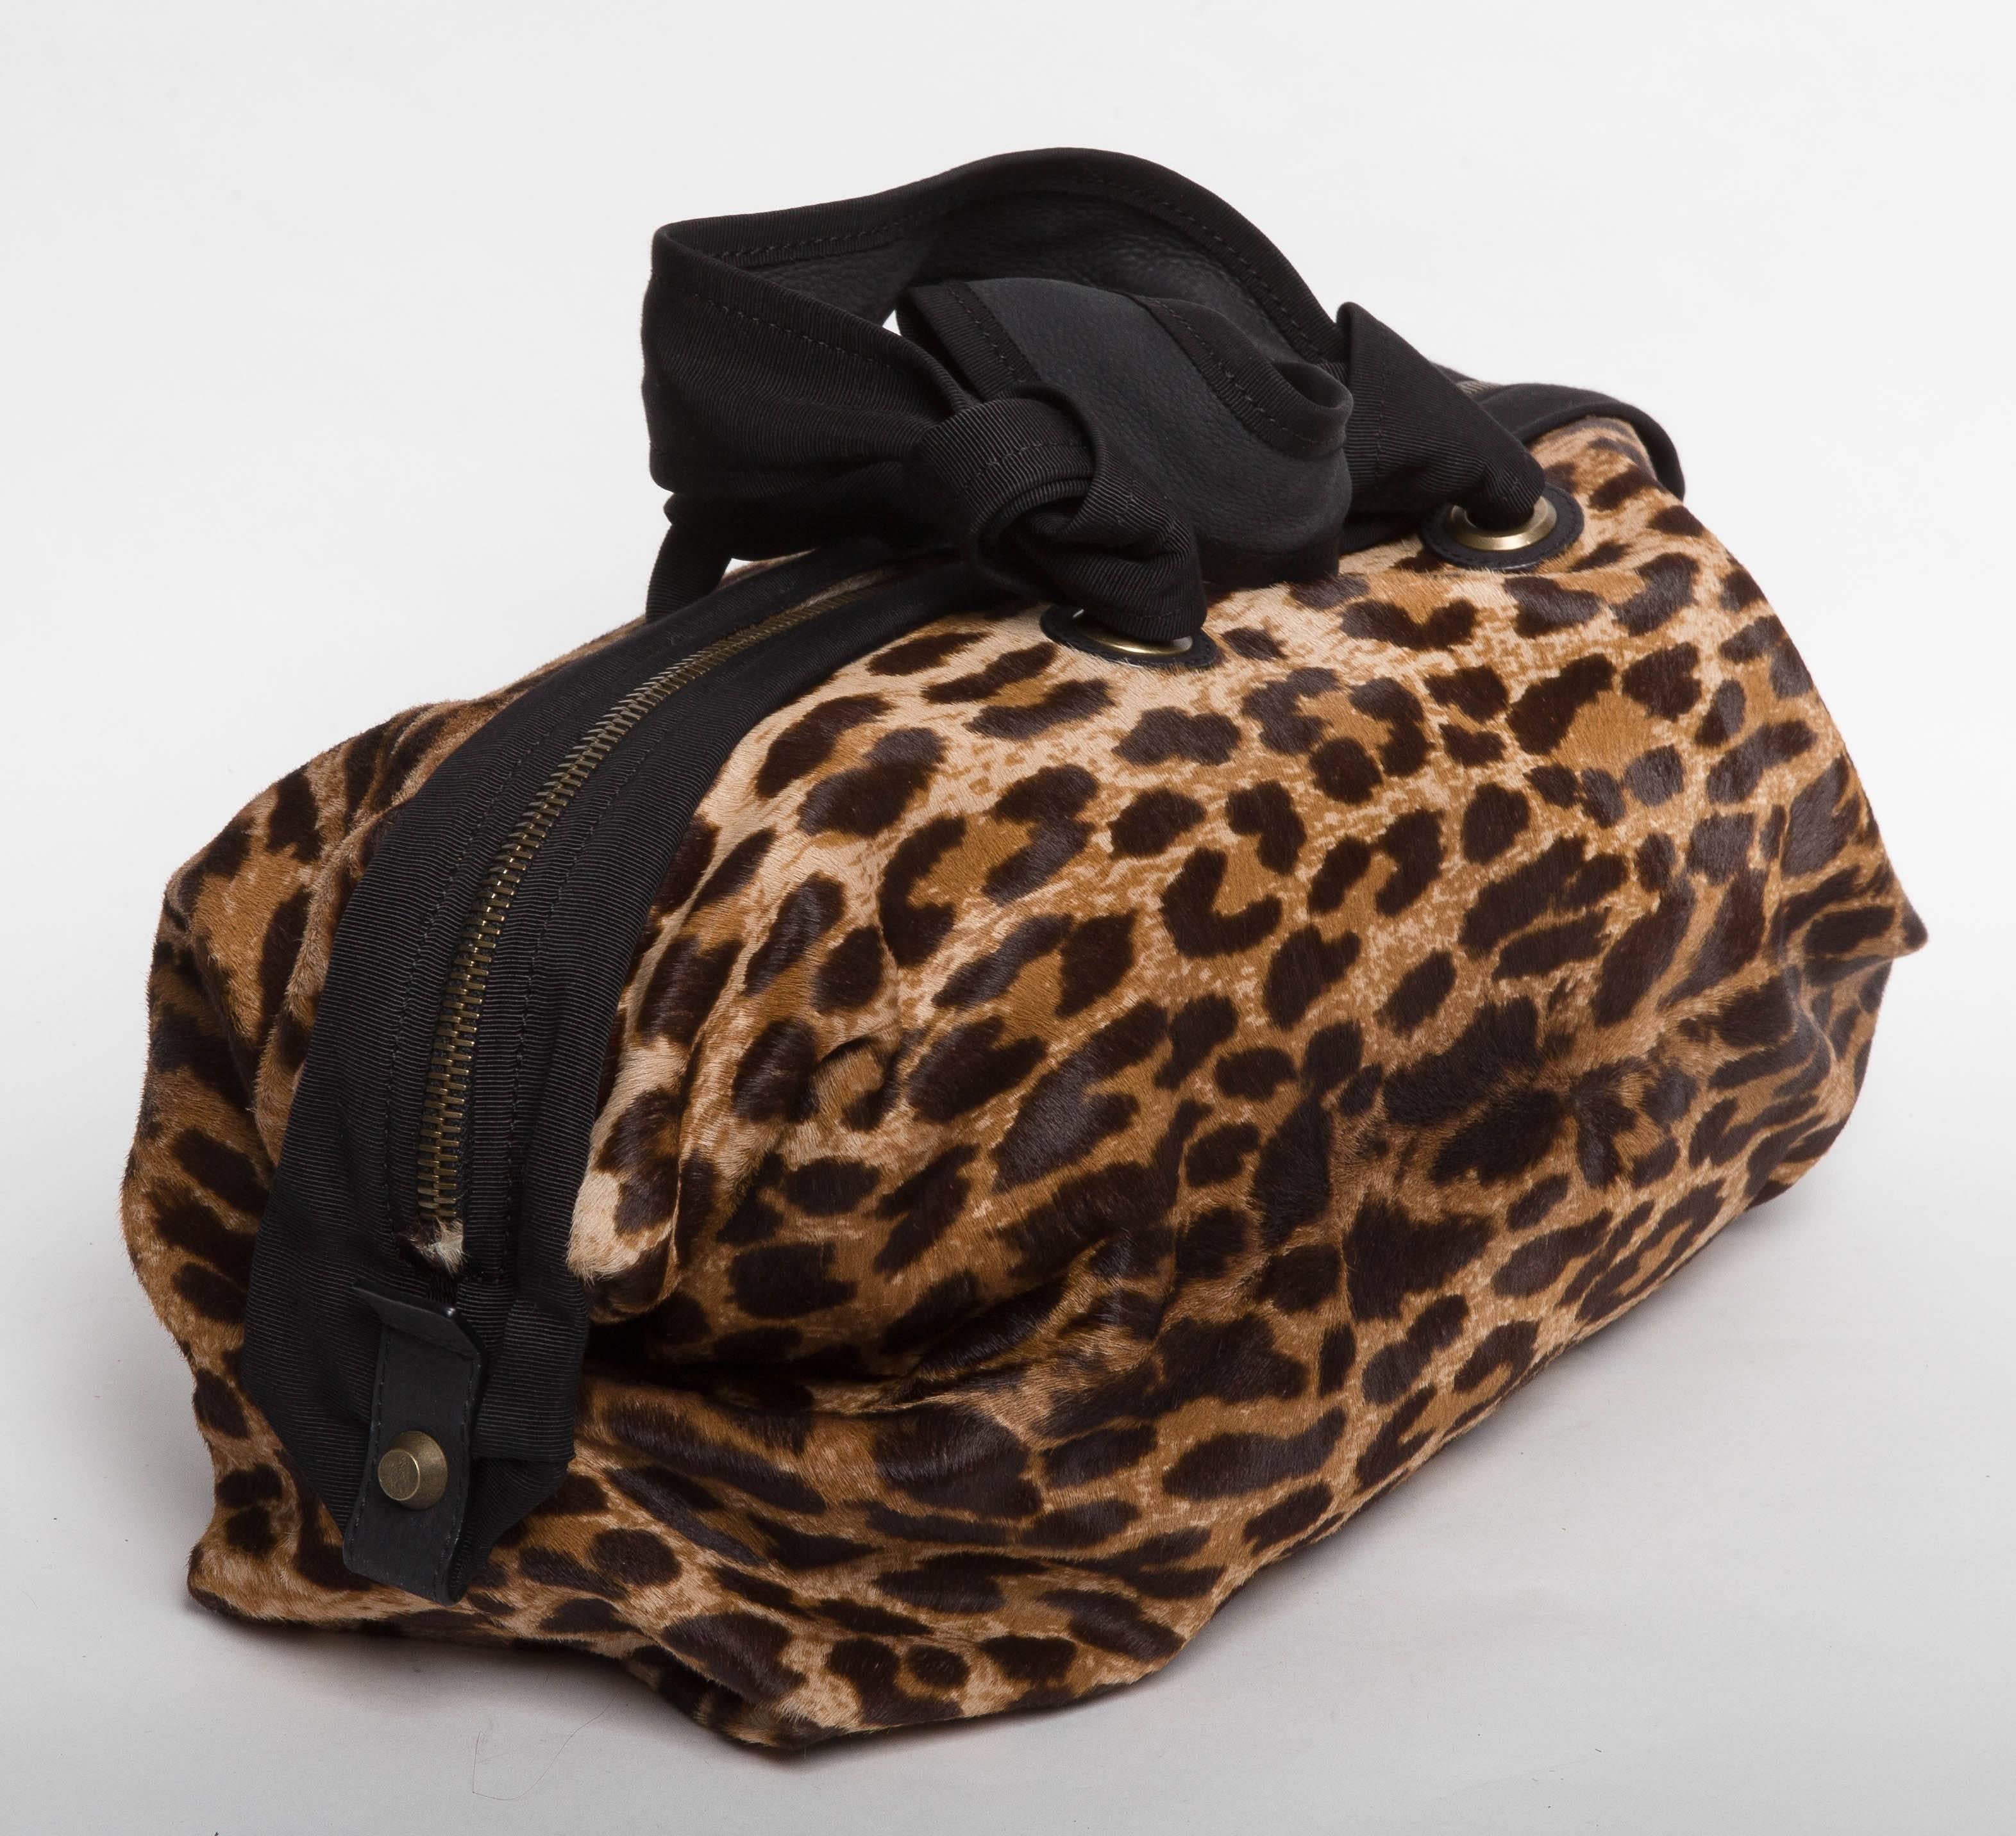 Very chic Lanvin pony skin bag in a cheetah animal print. Black grosgrain trim double handles and trim. Zips across the top of the bag. Large enough to use as a travelling tote or for every day use, this bag is in excellent condition. Four metal